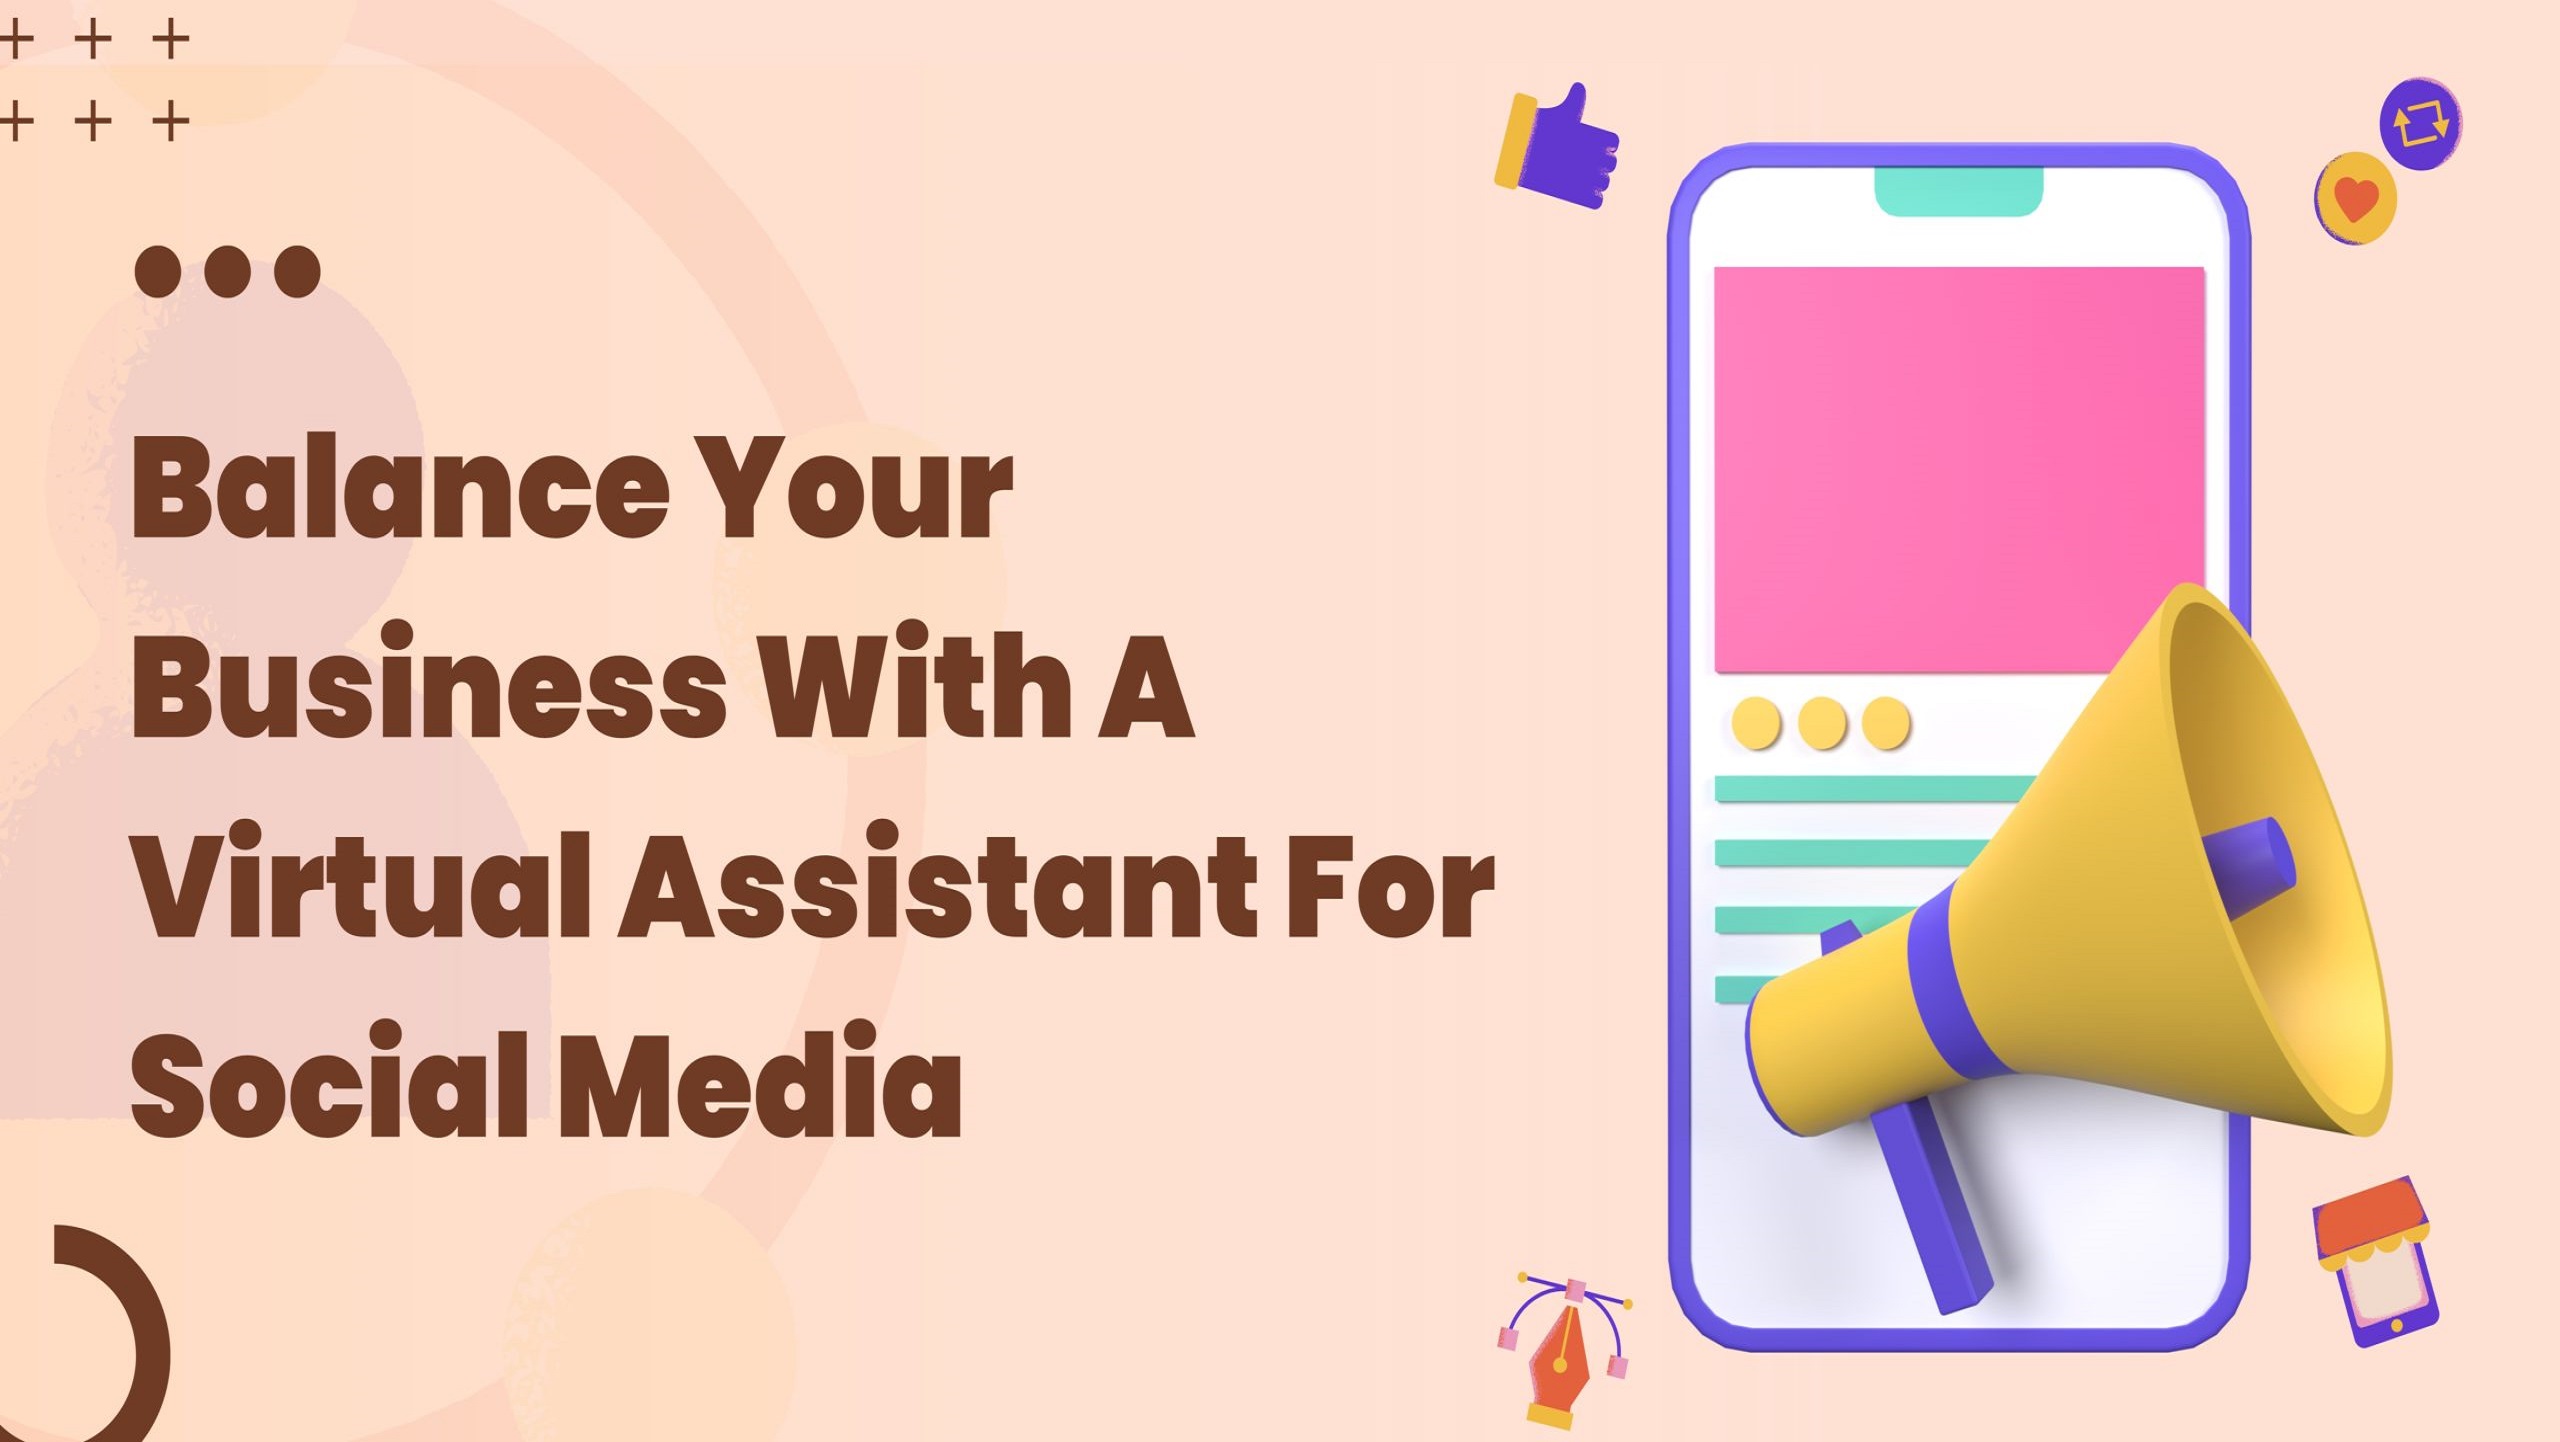 Balance Your Business With A Social Media Virtual Assistants